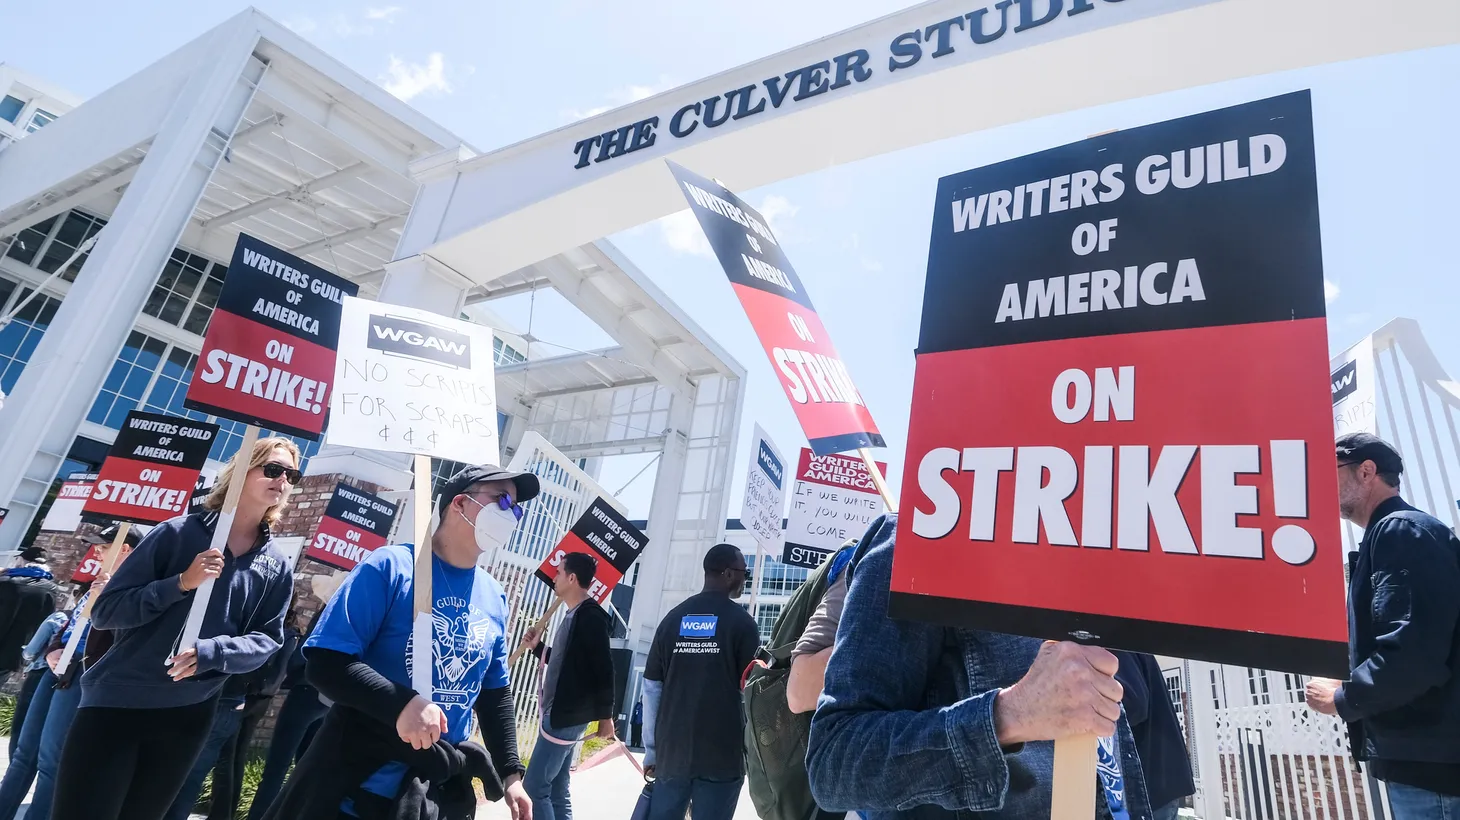 Members of the Writers Guild of America go on strike and picket outside The Culver Studios in Culver City, California on Tuesday, May 2, 2023.